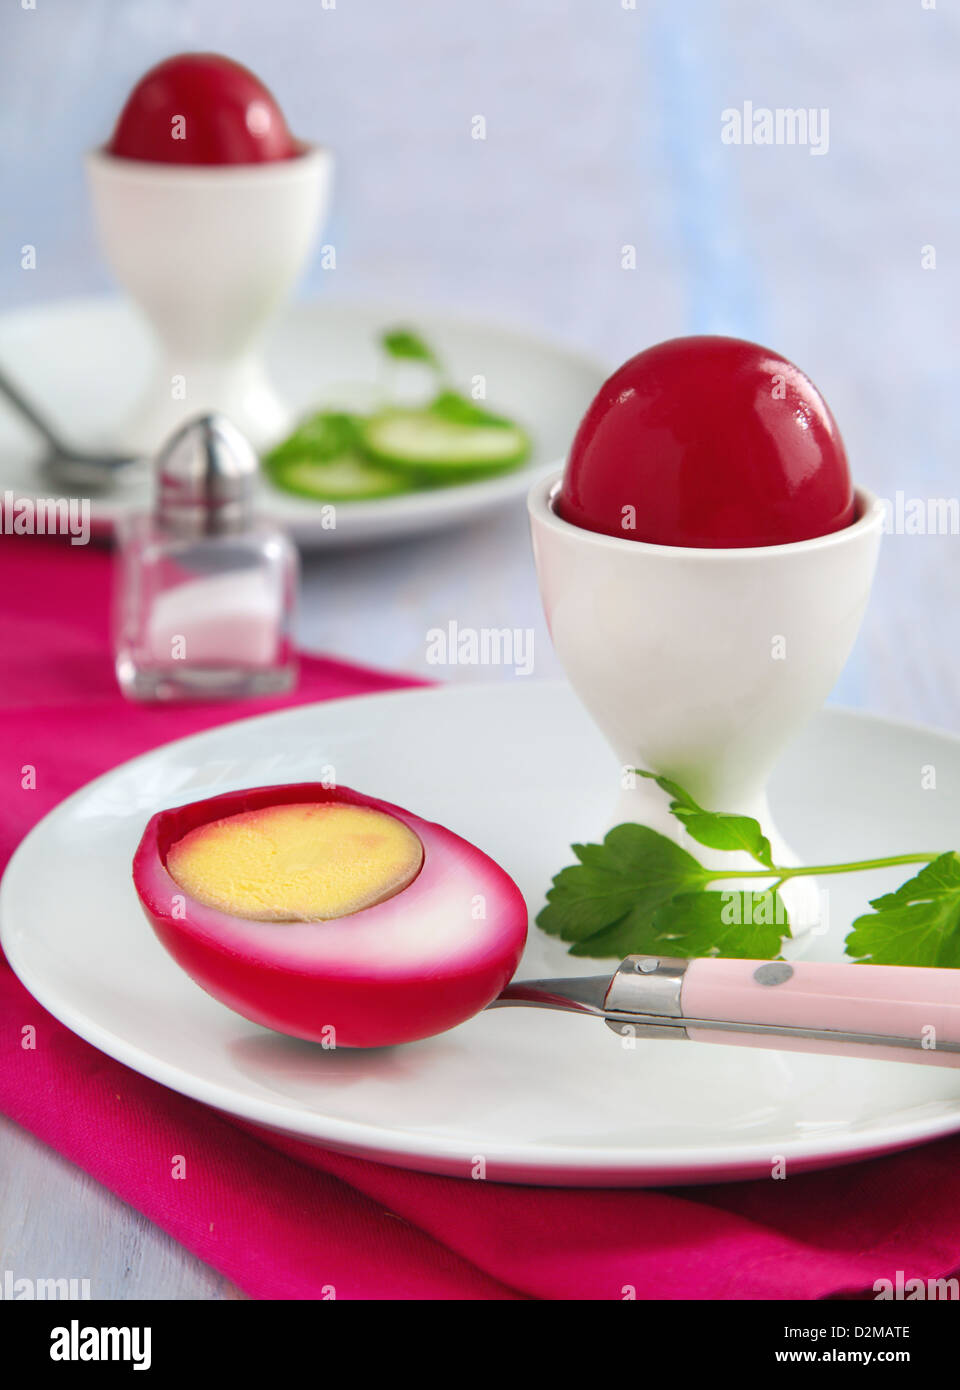 Beet-pickled eggs Stock Photo